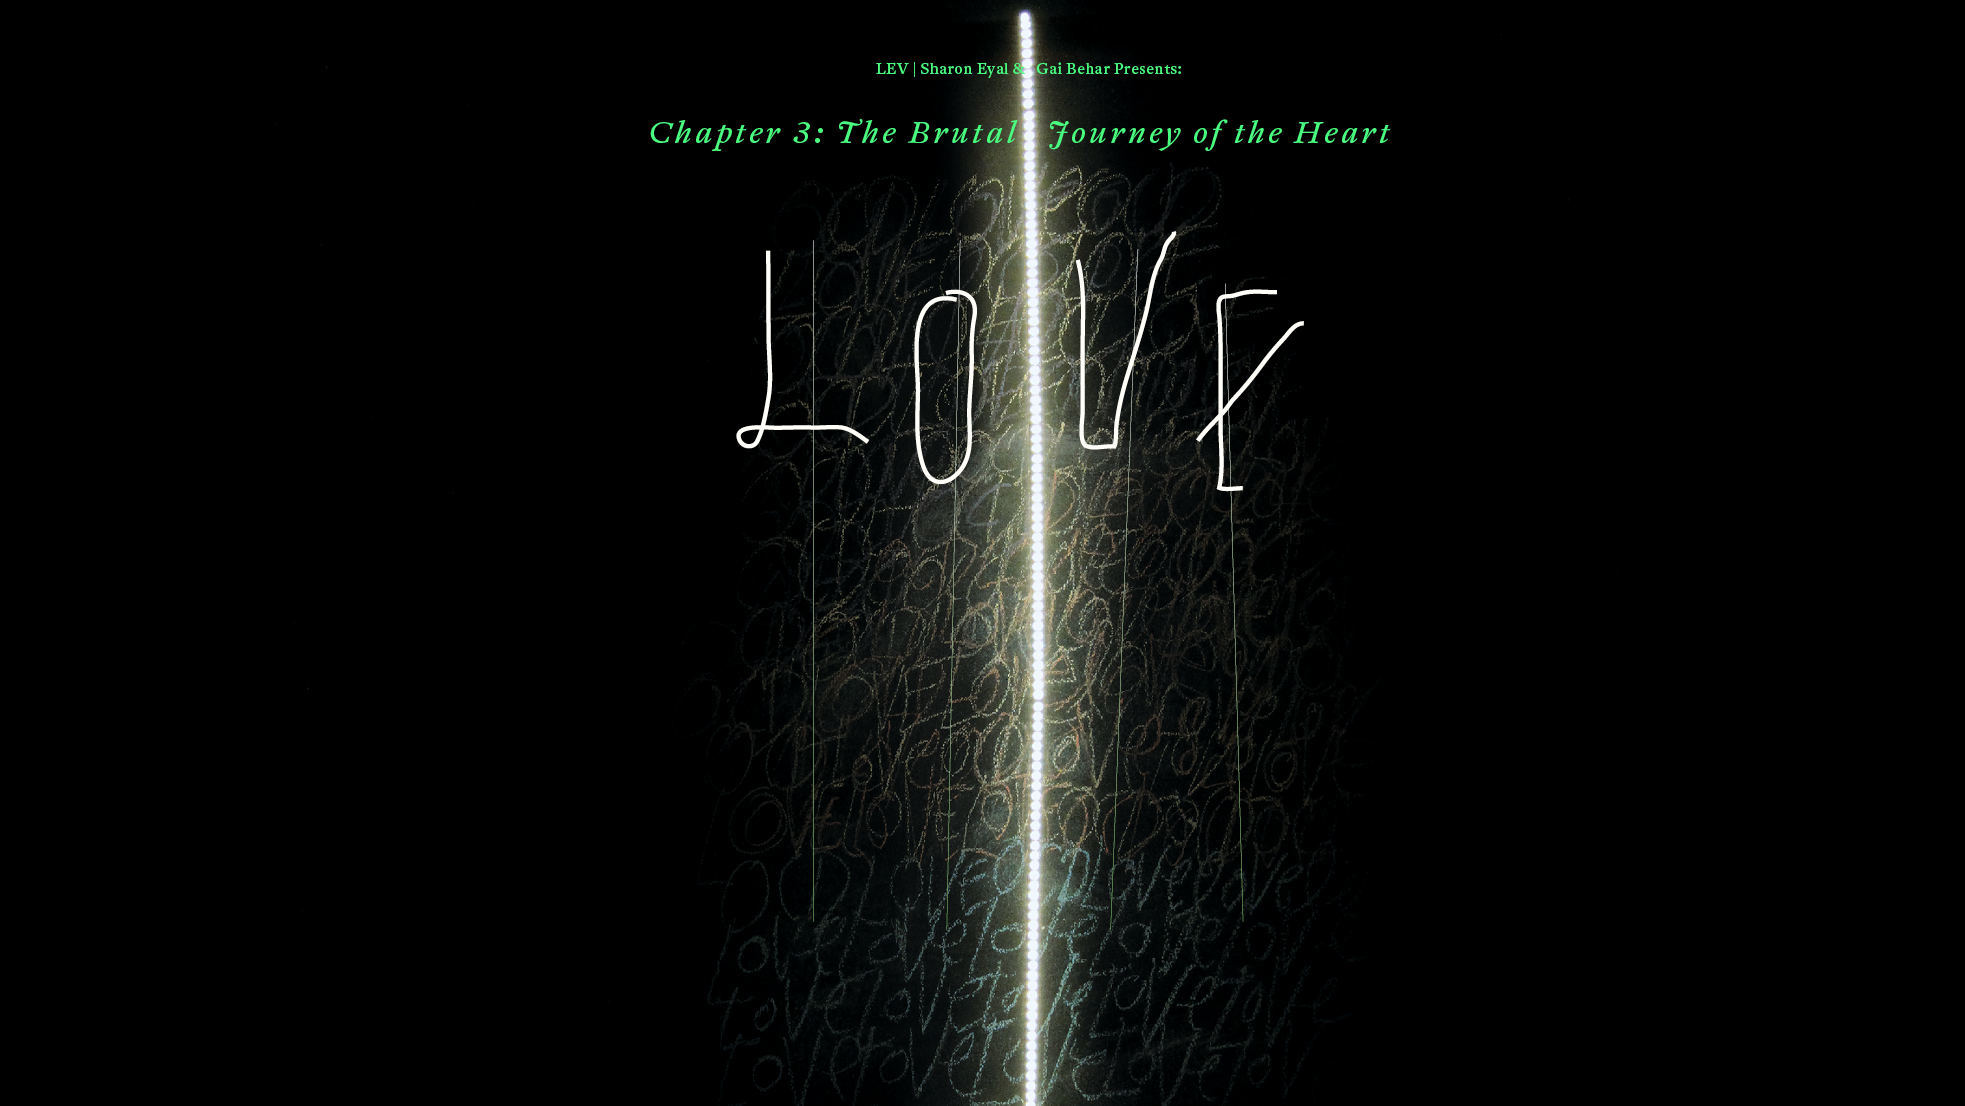 Chapter 3: The Brutal Journey of the Heart